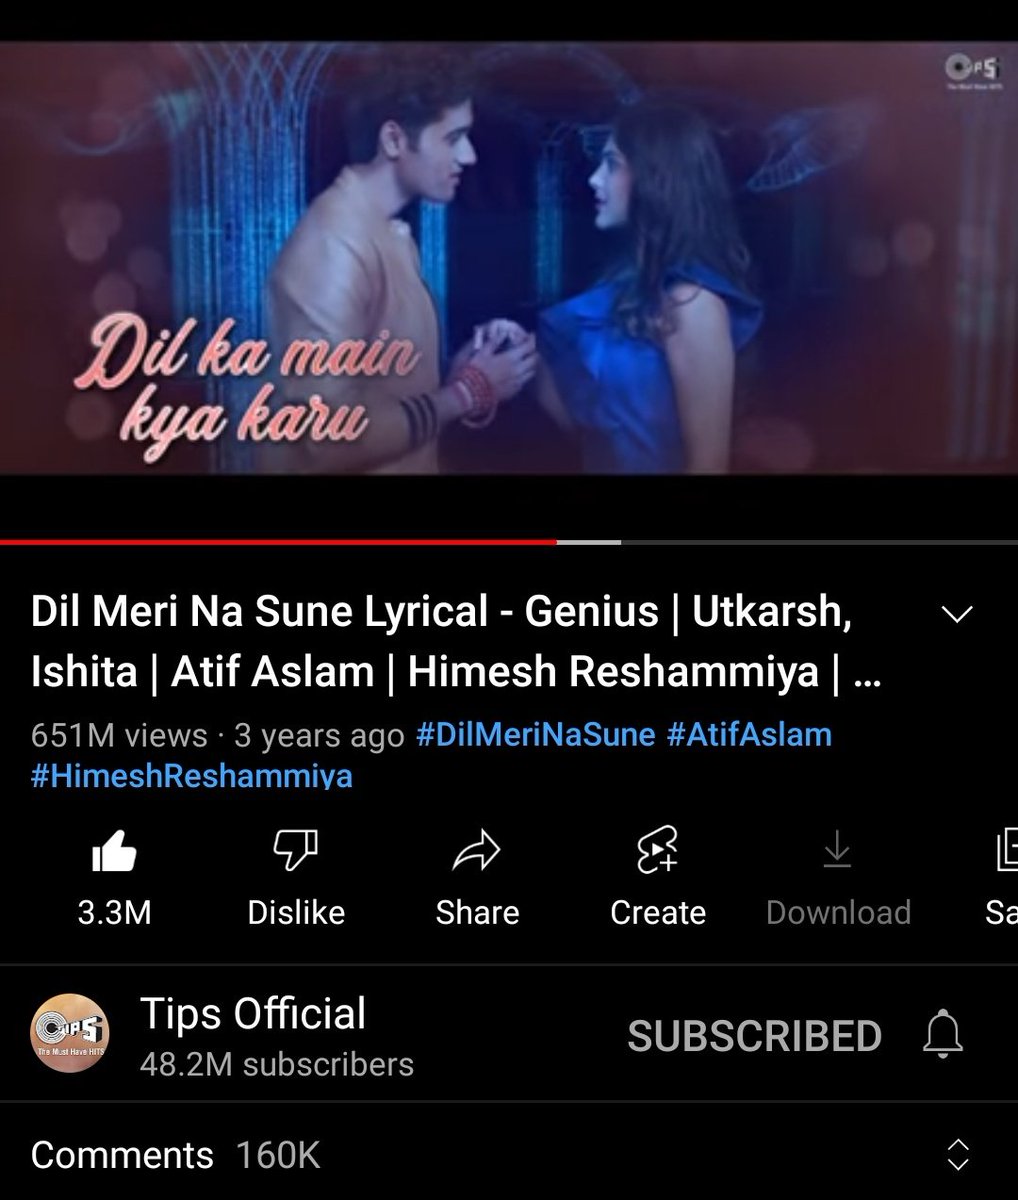 #DilMeriNaSune beats #DilDiyangallan and becomes most liked #AtifAslam song on YouTube with 3.3m likes.

@itsaadee @tipsofficial